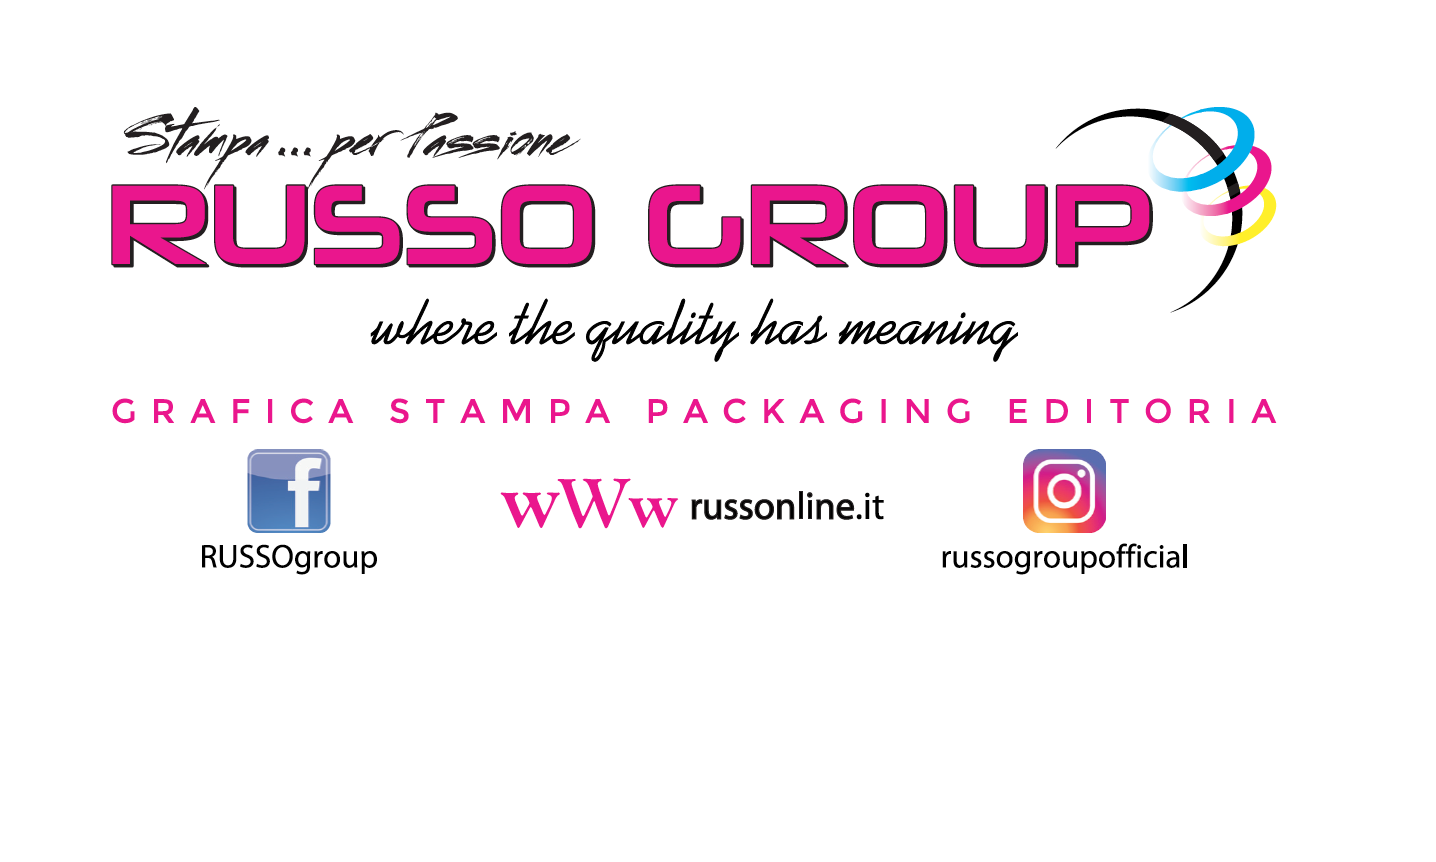 Russo Group